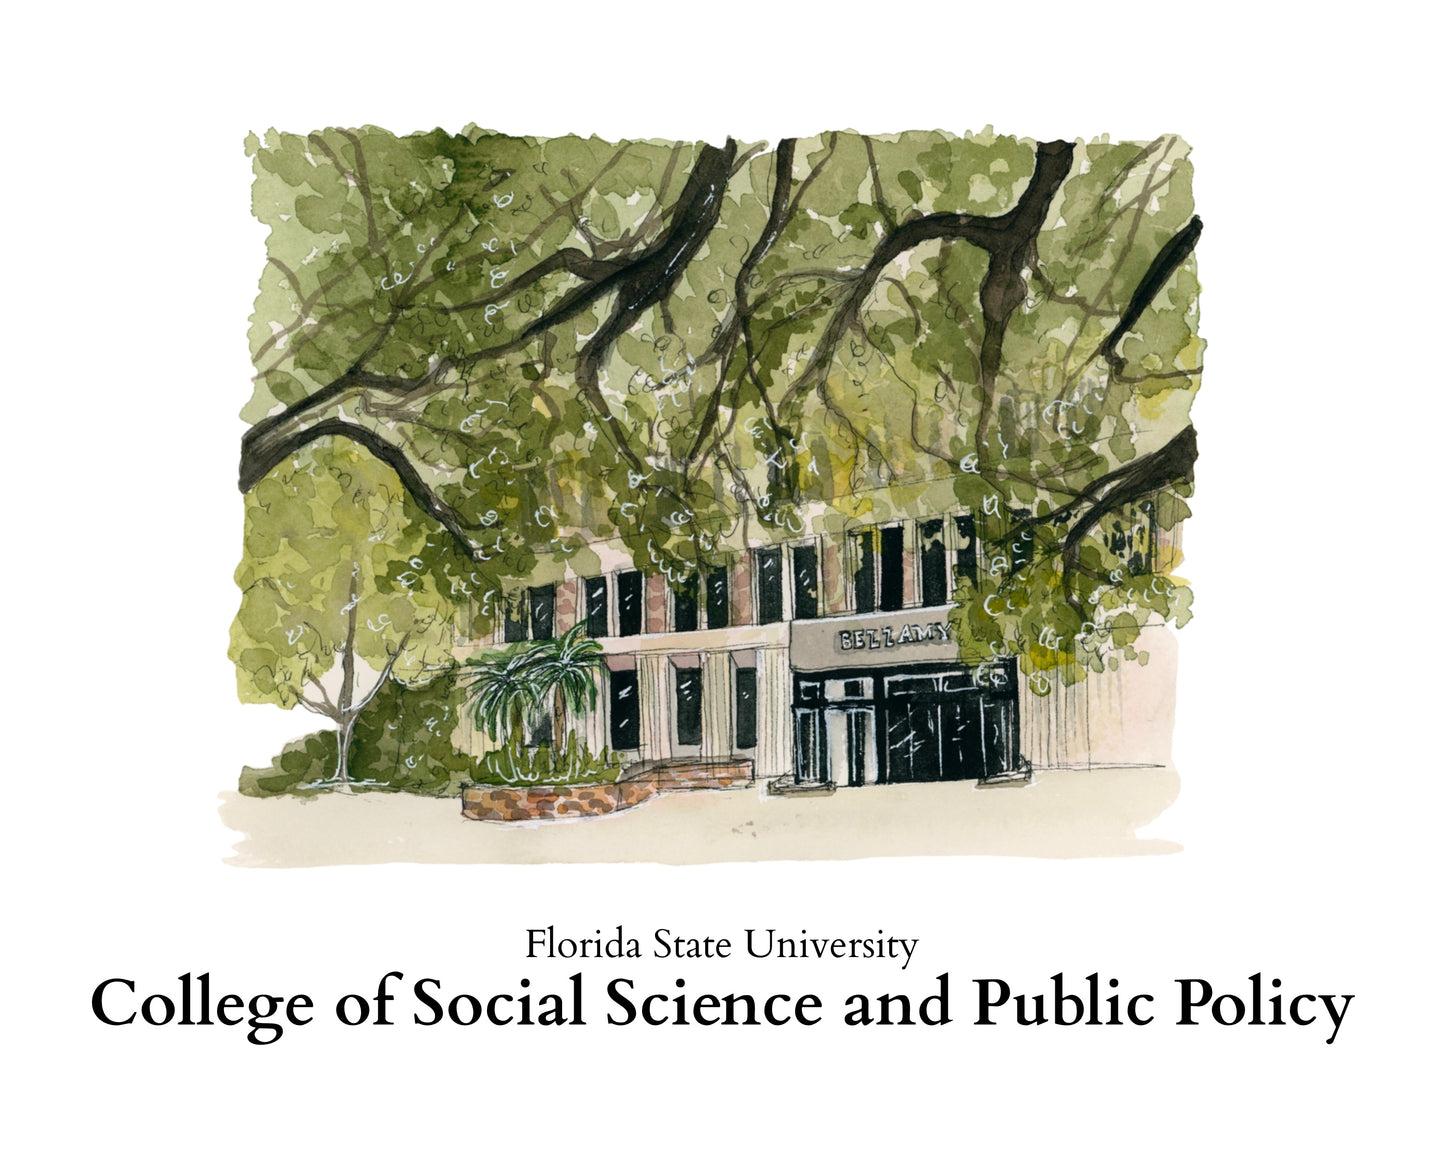 Florida State University College of Social Science and Public Policy Print